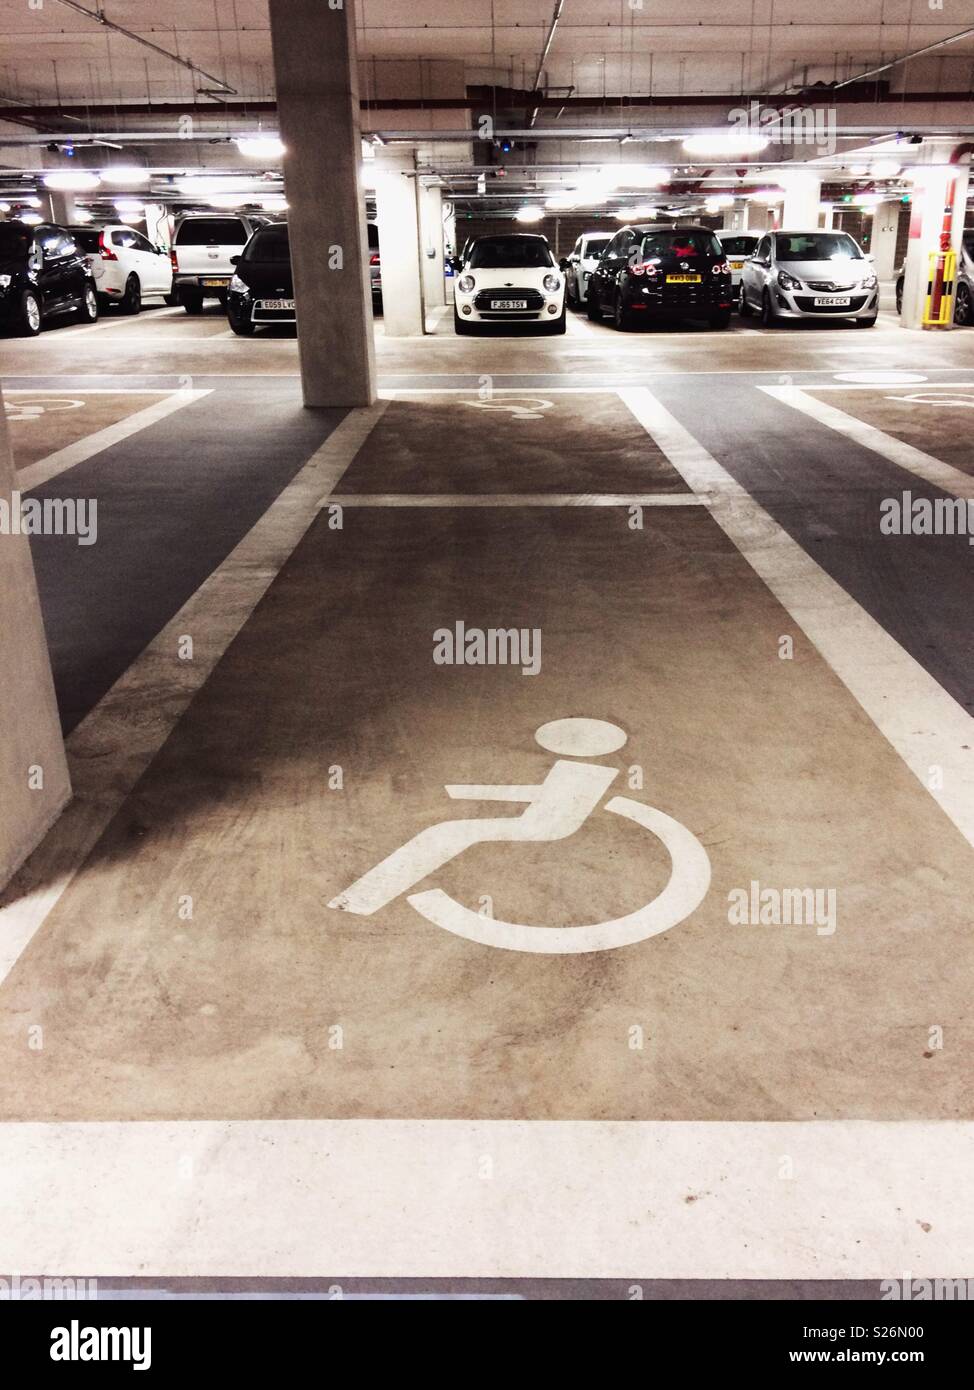 Disabled parking sign on the floor of an empty parking space in a car park Stock Photo